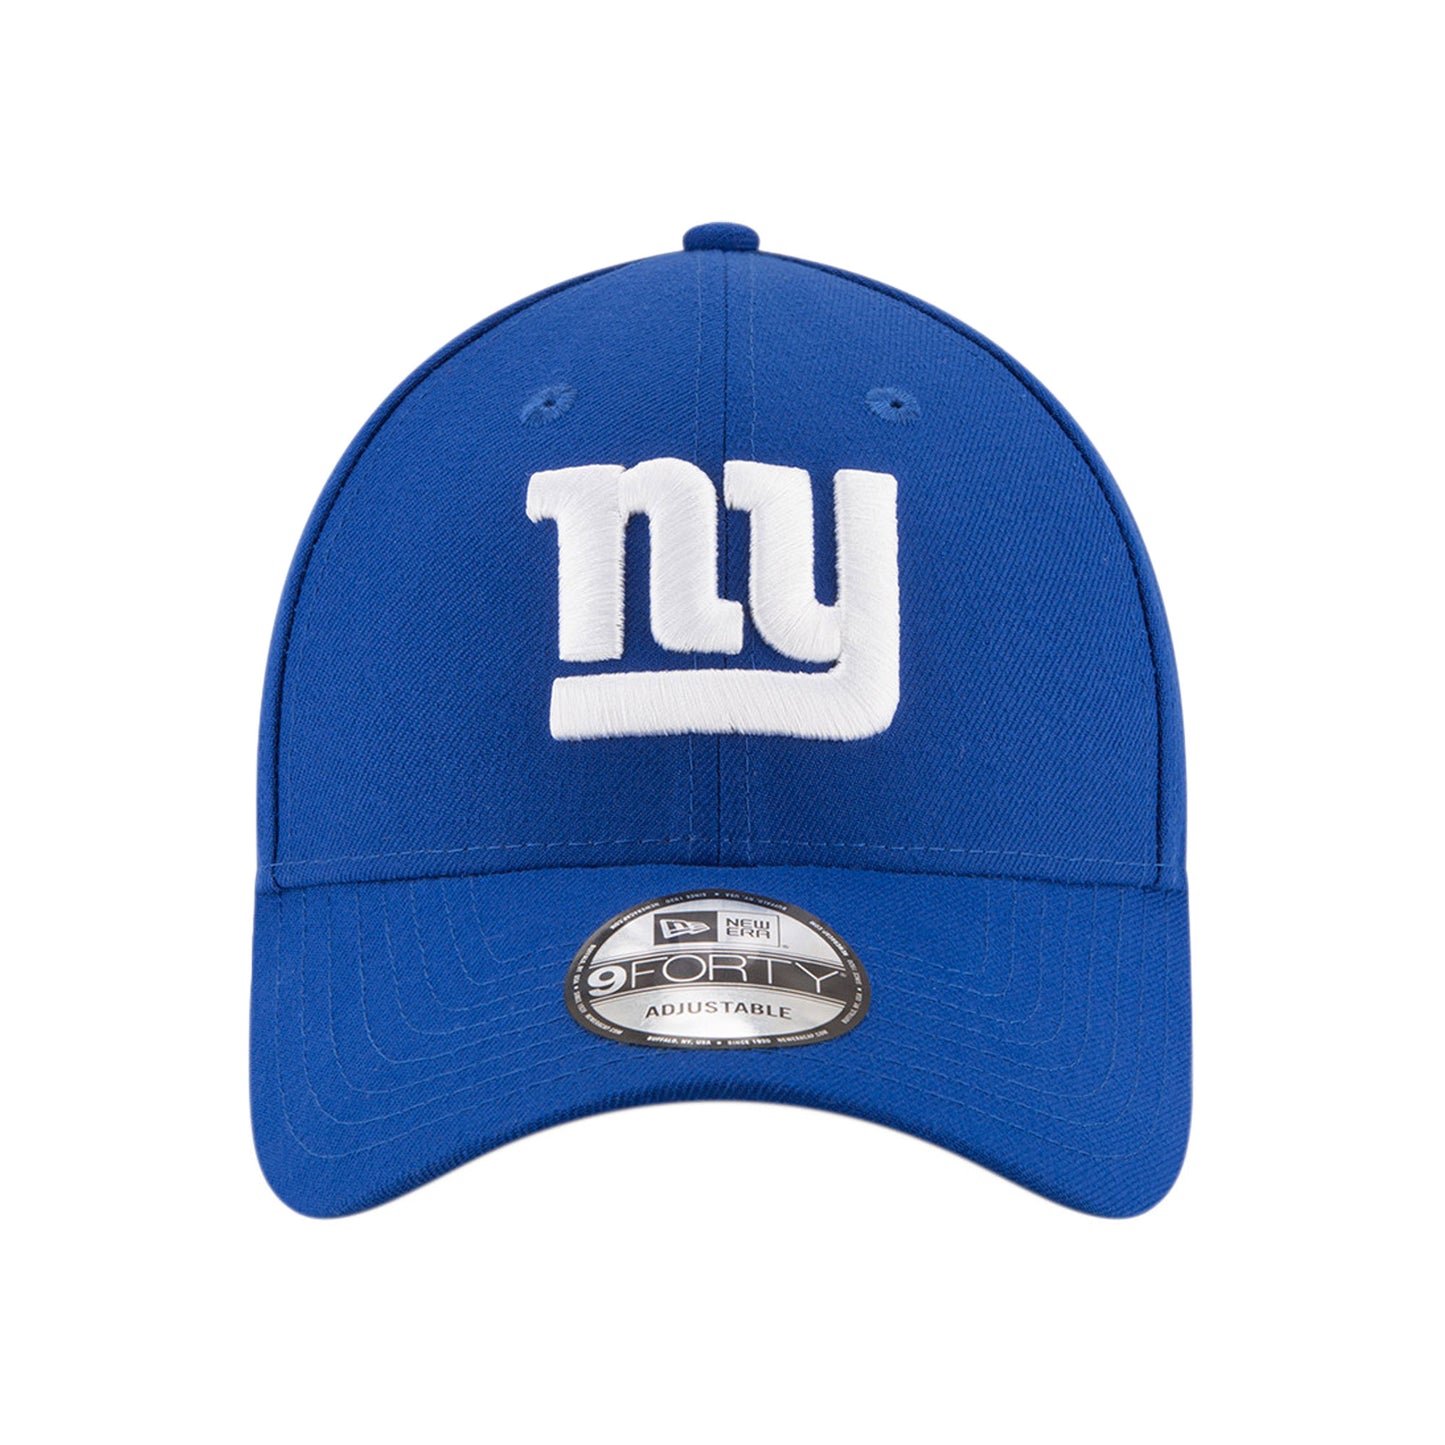 THE LEAGUE New York Giants 9FORTY New Era Cap